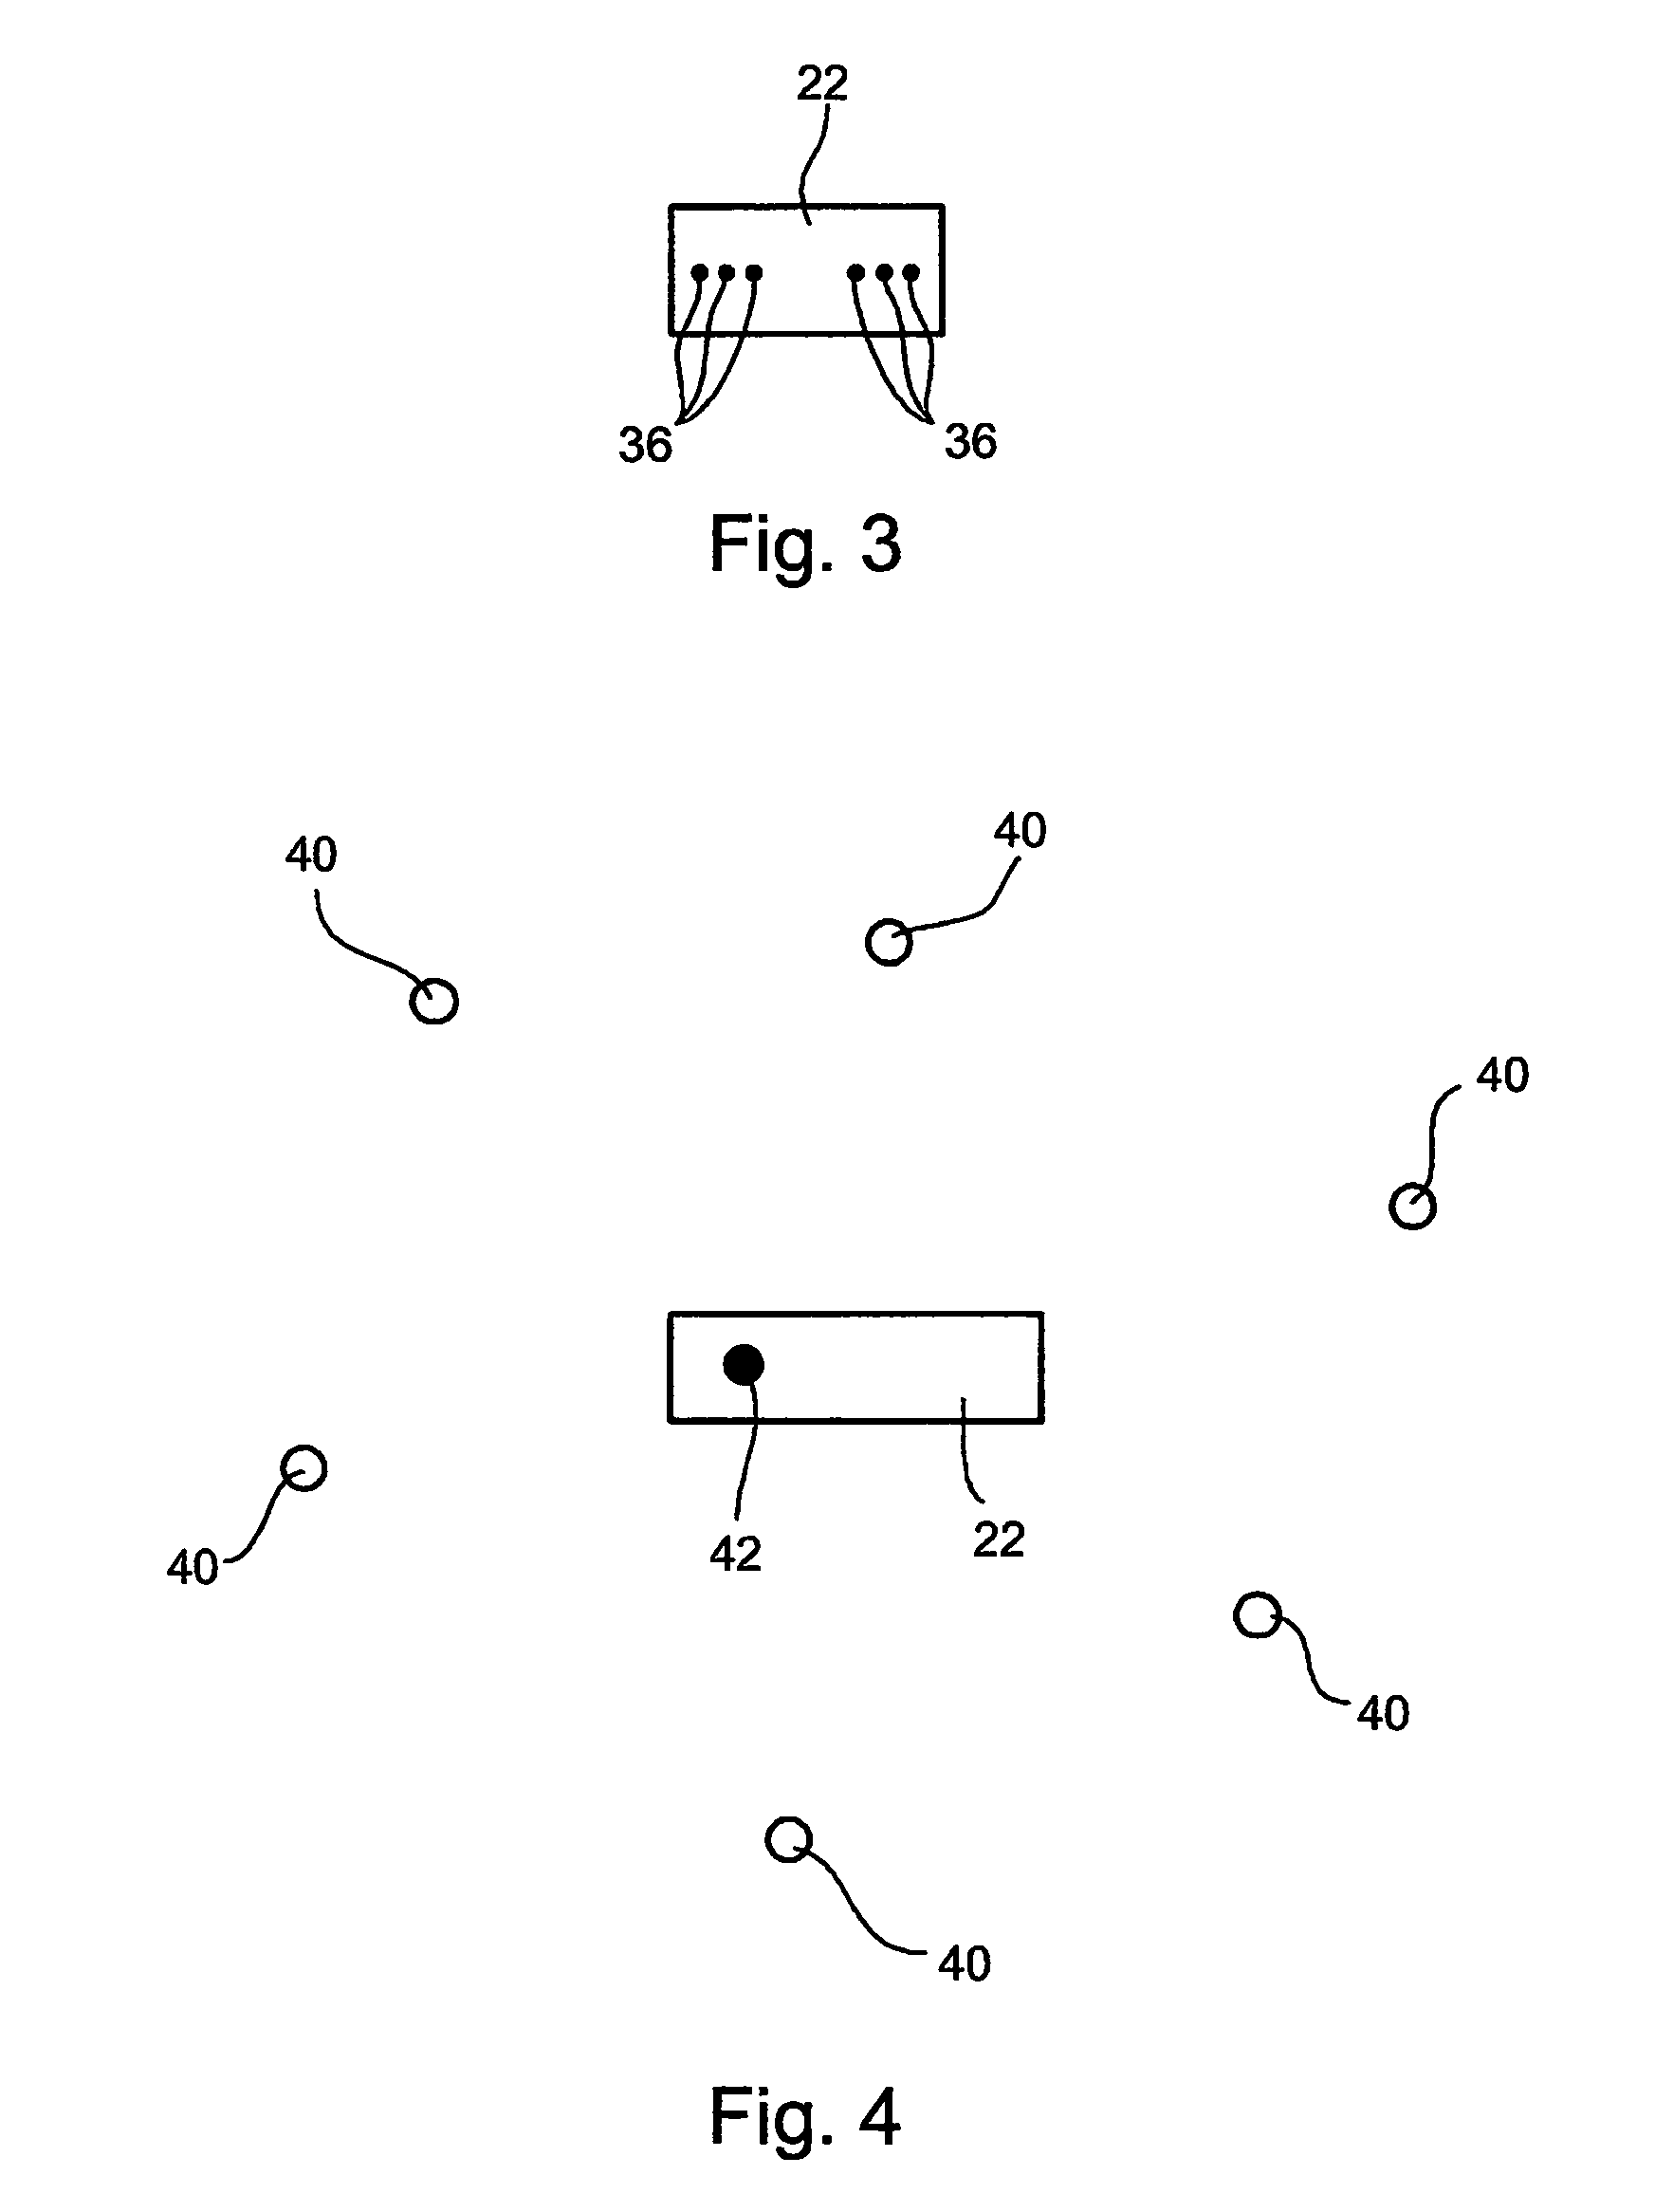 Radioactive emission detector equipped with a position tracking system and utilization thereof with medical systems and in medical procedures